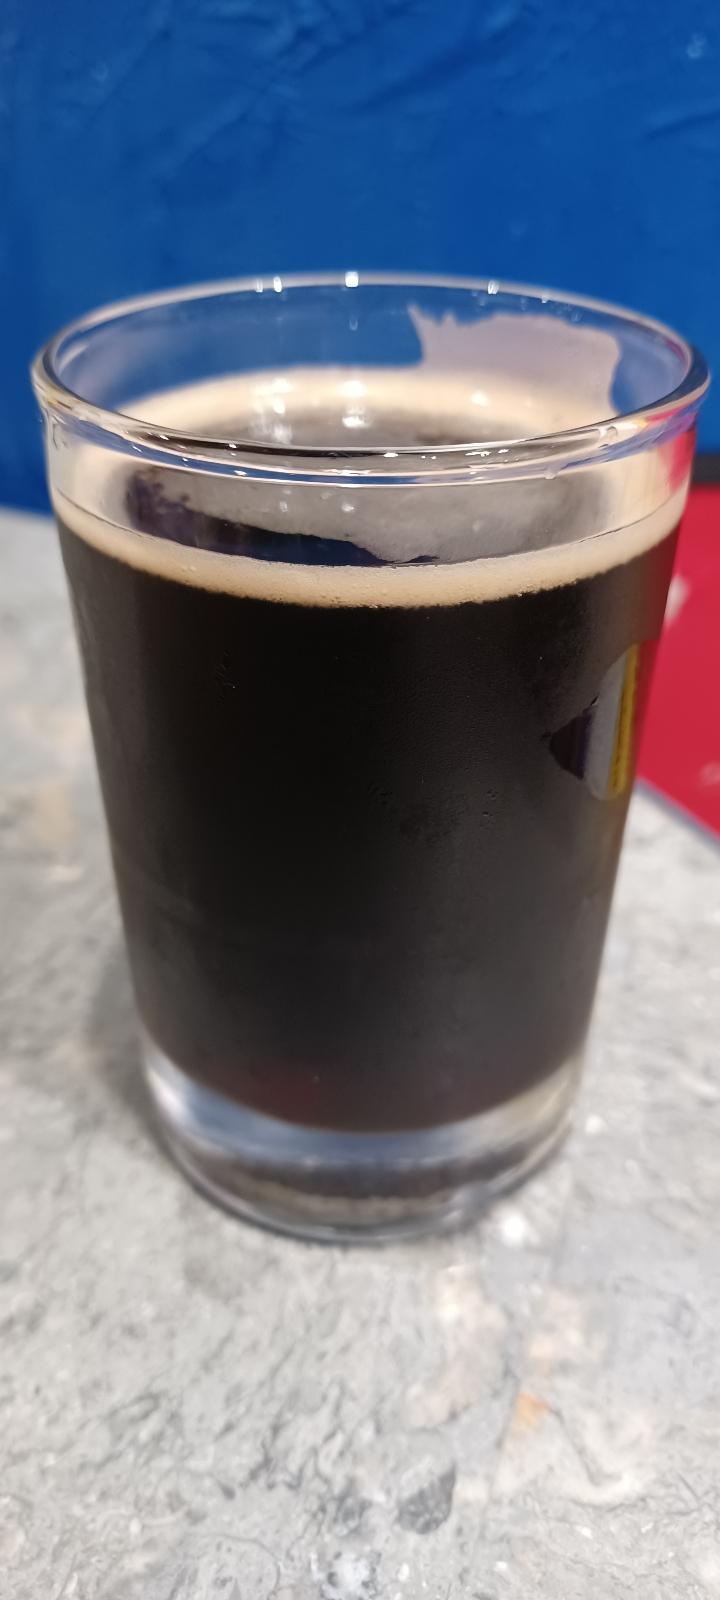 Obsidian Stout with Peanut Butter